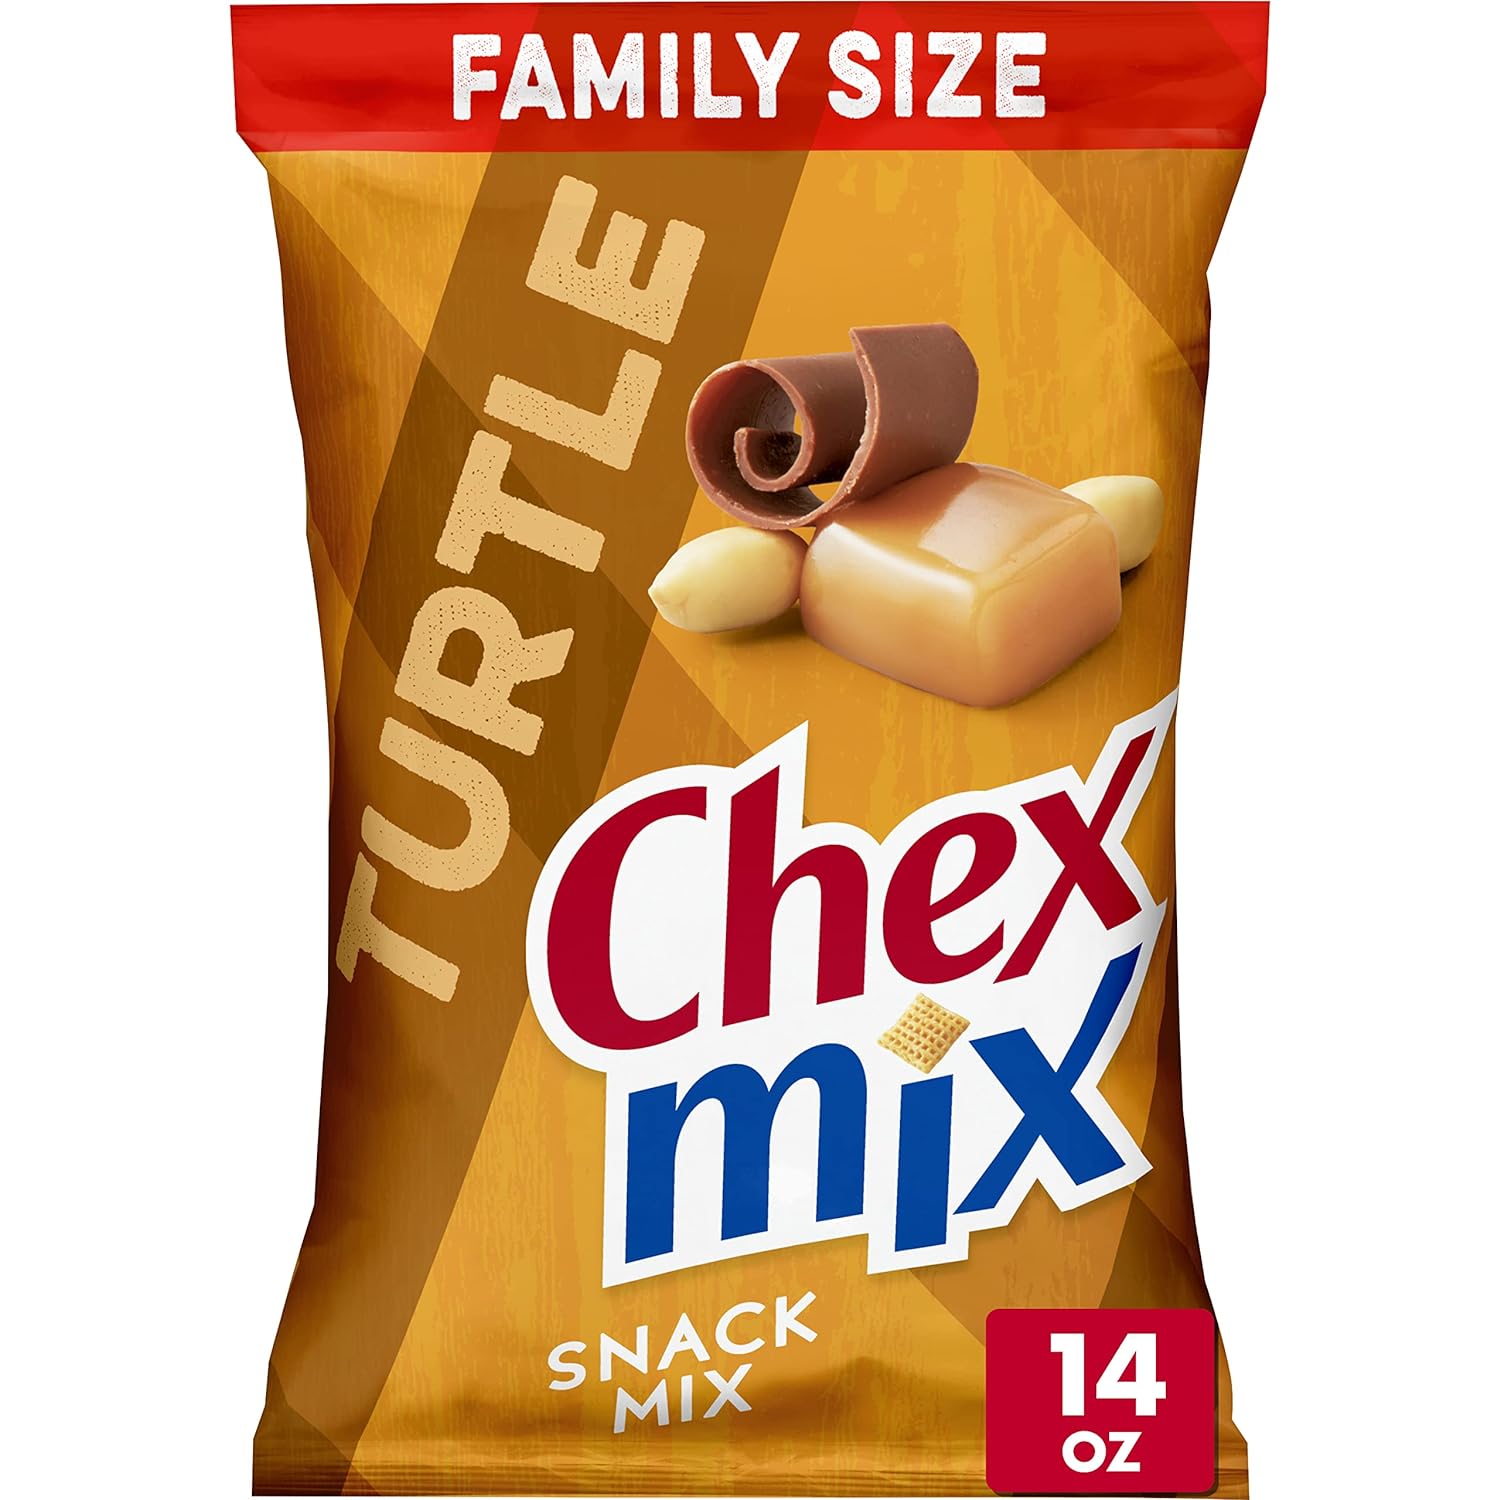 Chex Mix Snack Mix, Turtle, Indulgent Snack Bag, 14 oz, as low as $2.77 @ Amazon